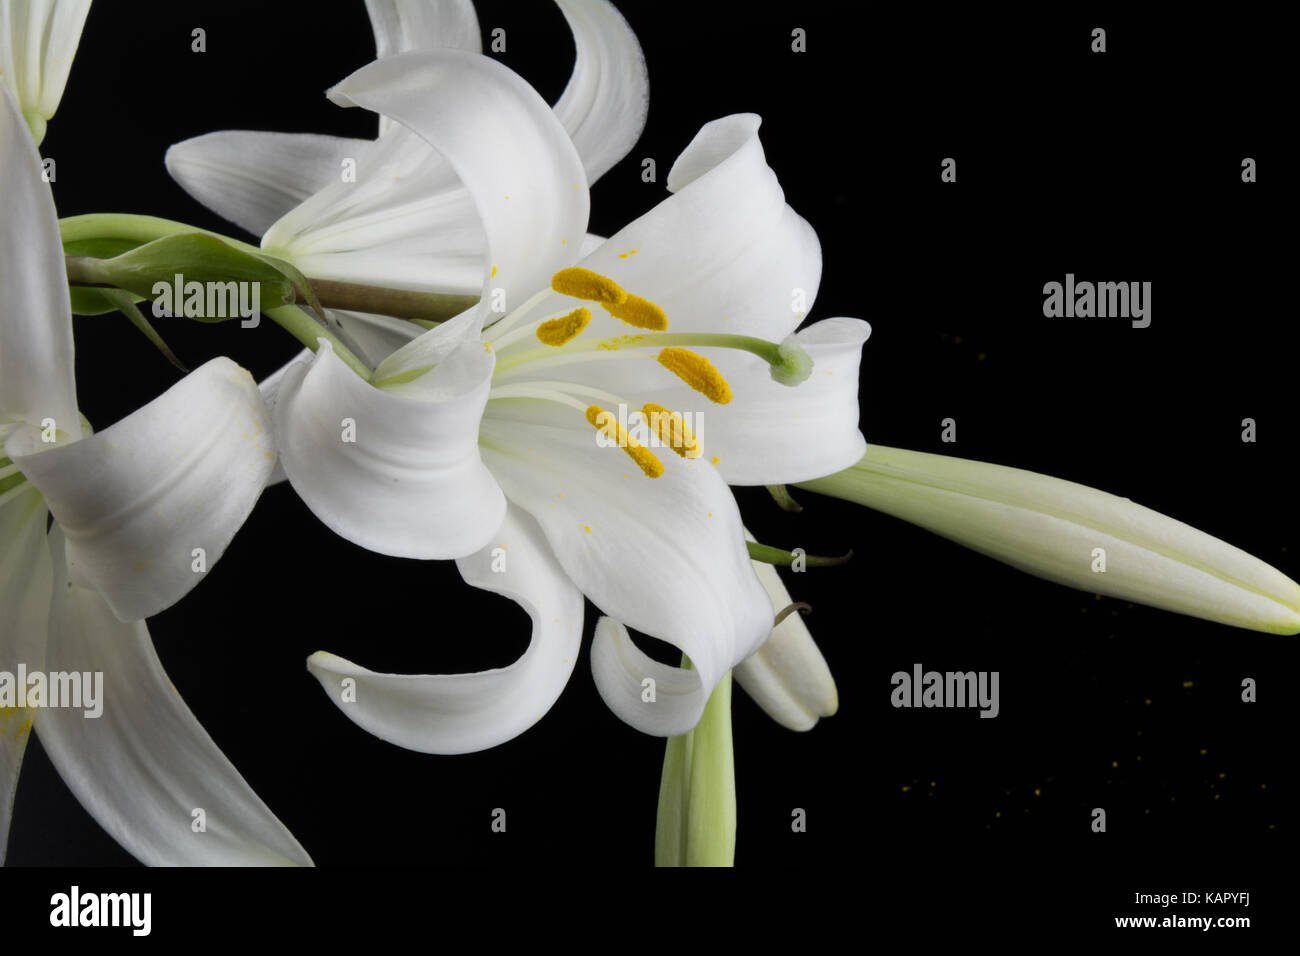 Flowers and buds of lilies on a black background Stock Photo